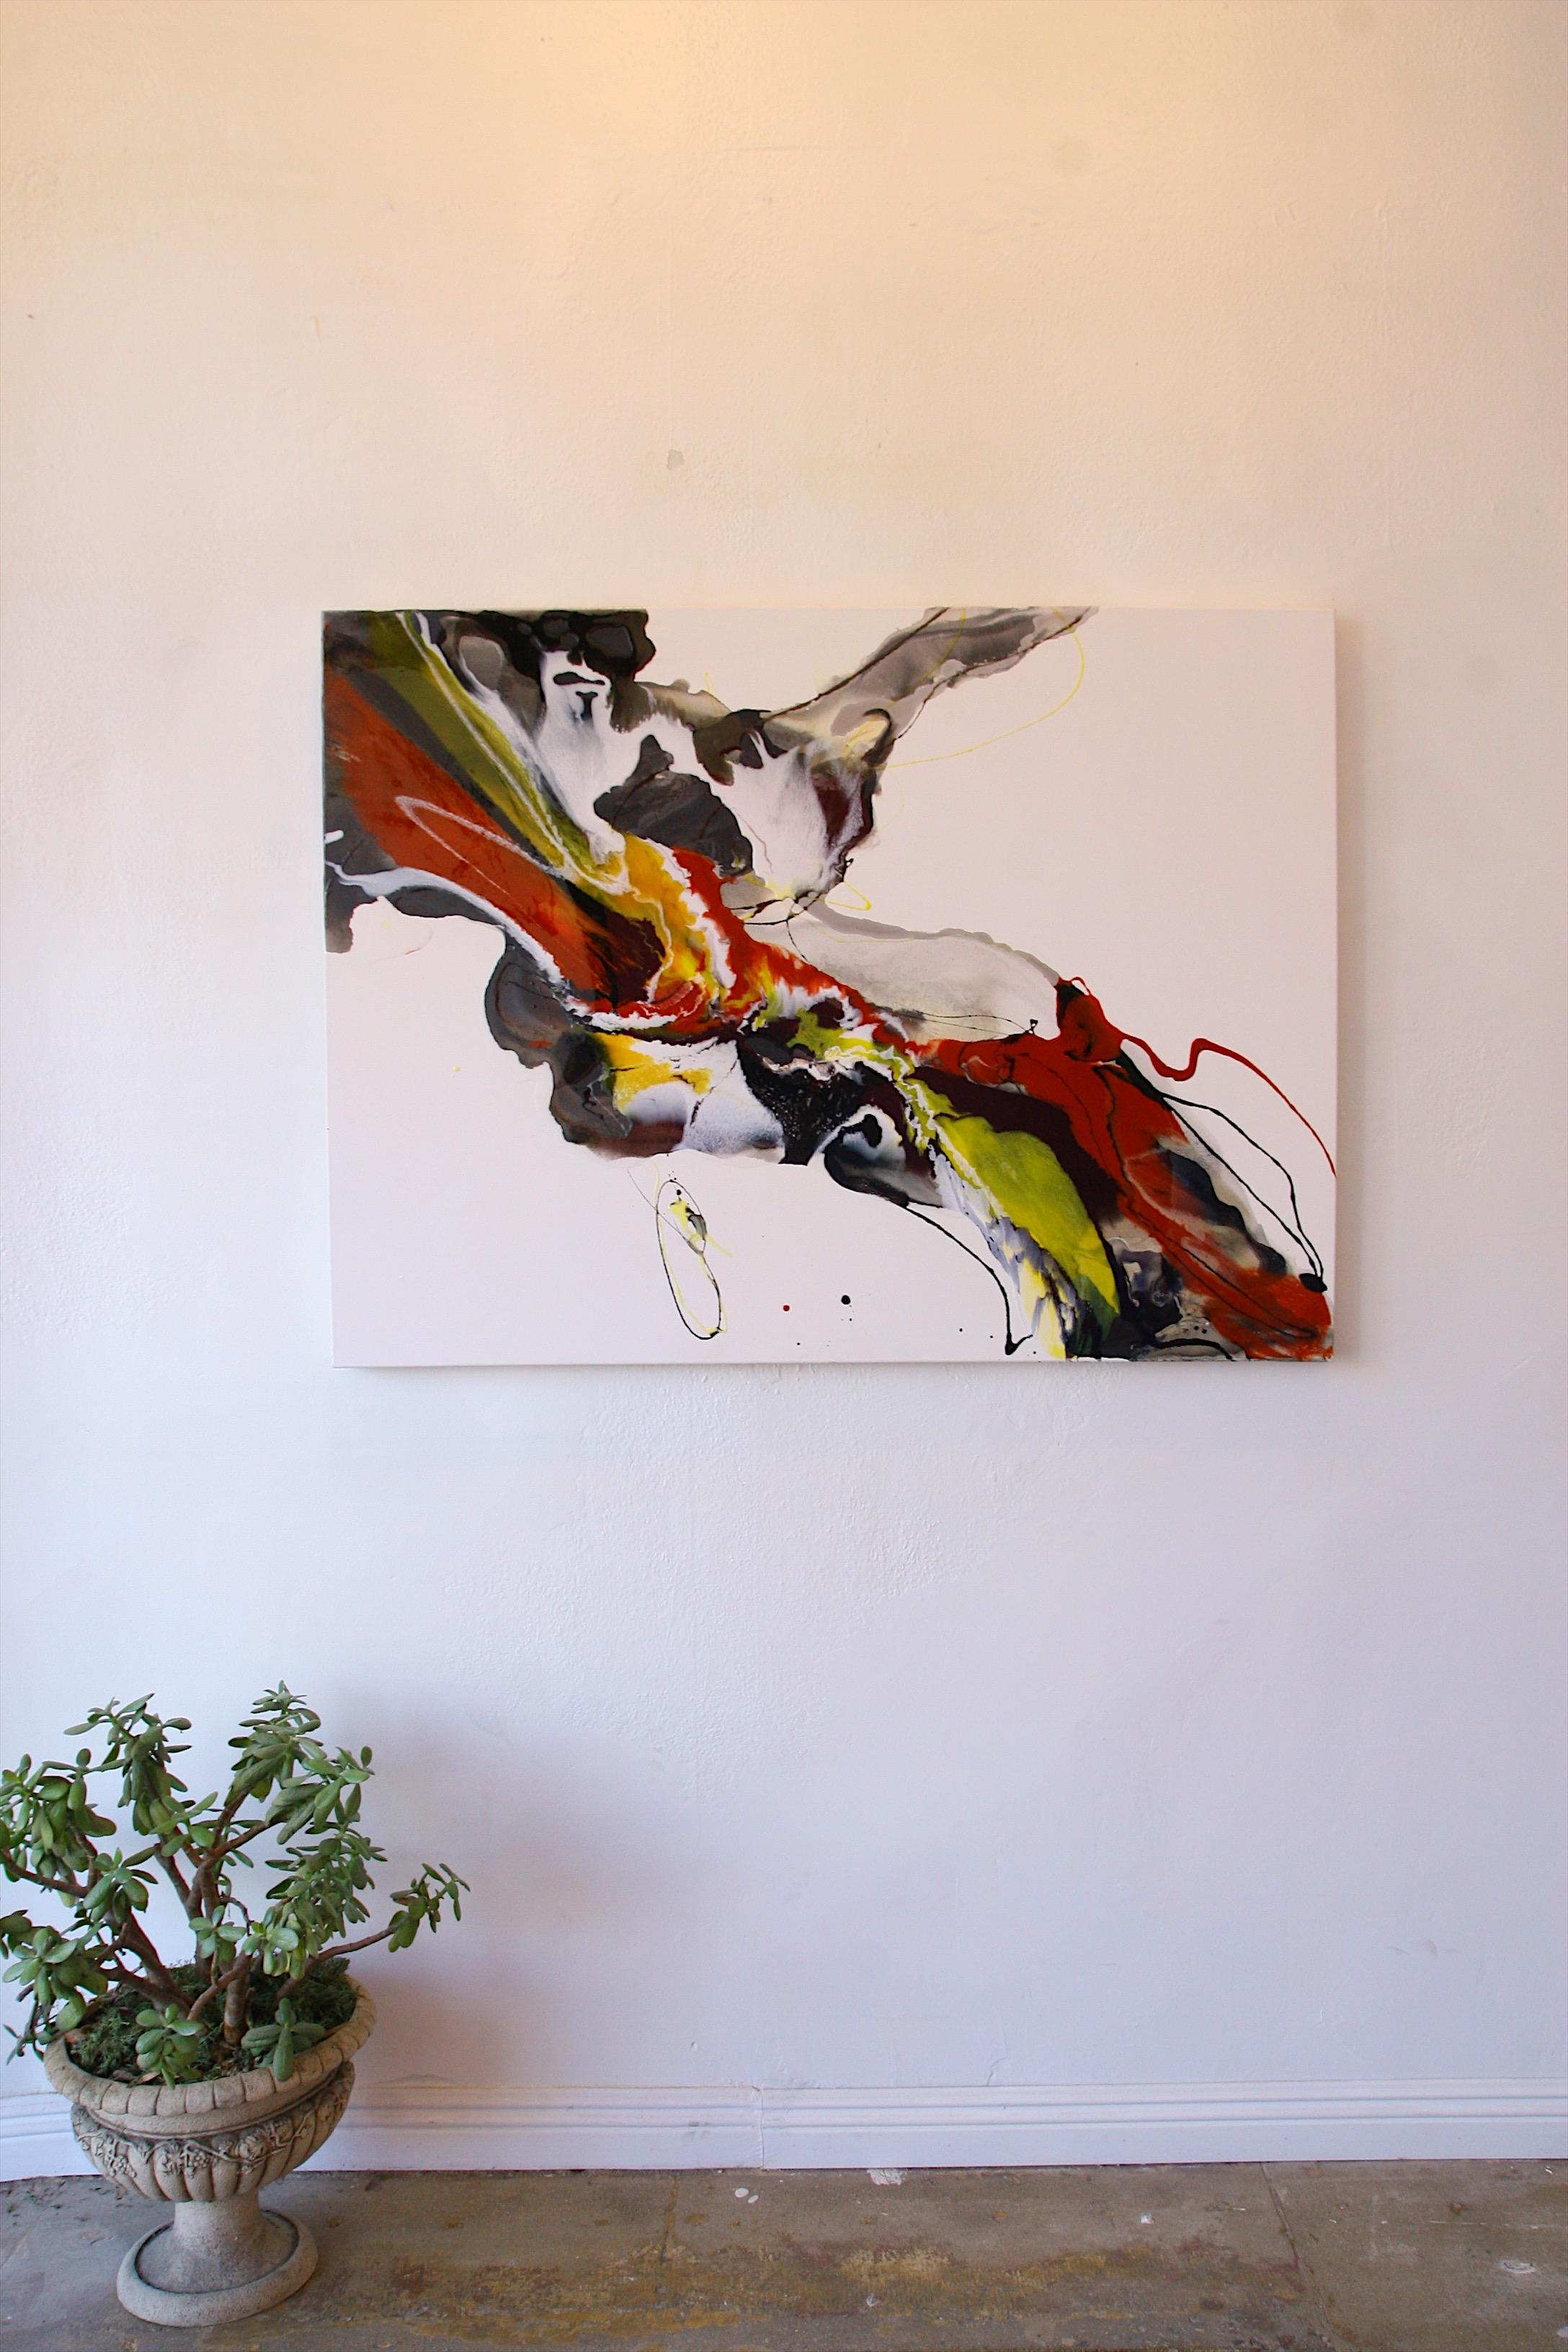 Untitled - abstract painting in red orange yellow white black  - Painting by Lena Cher